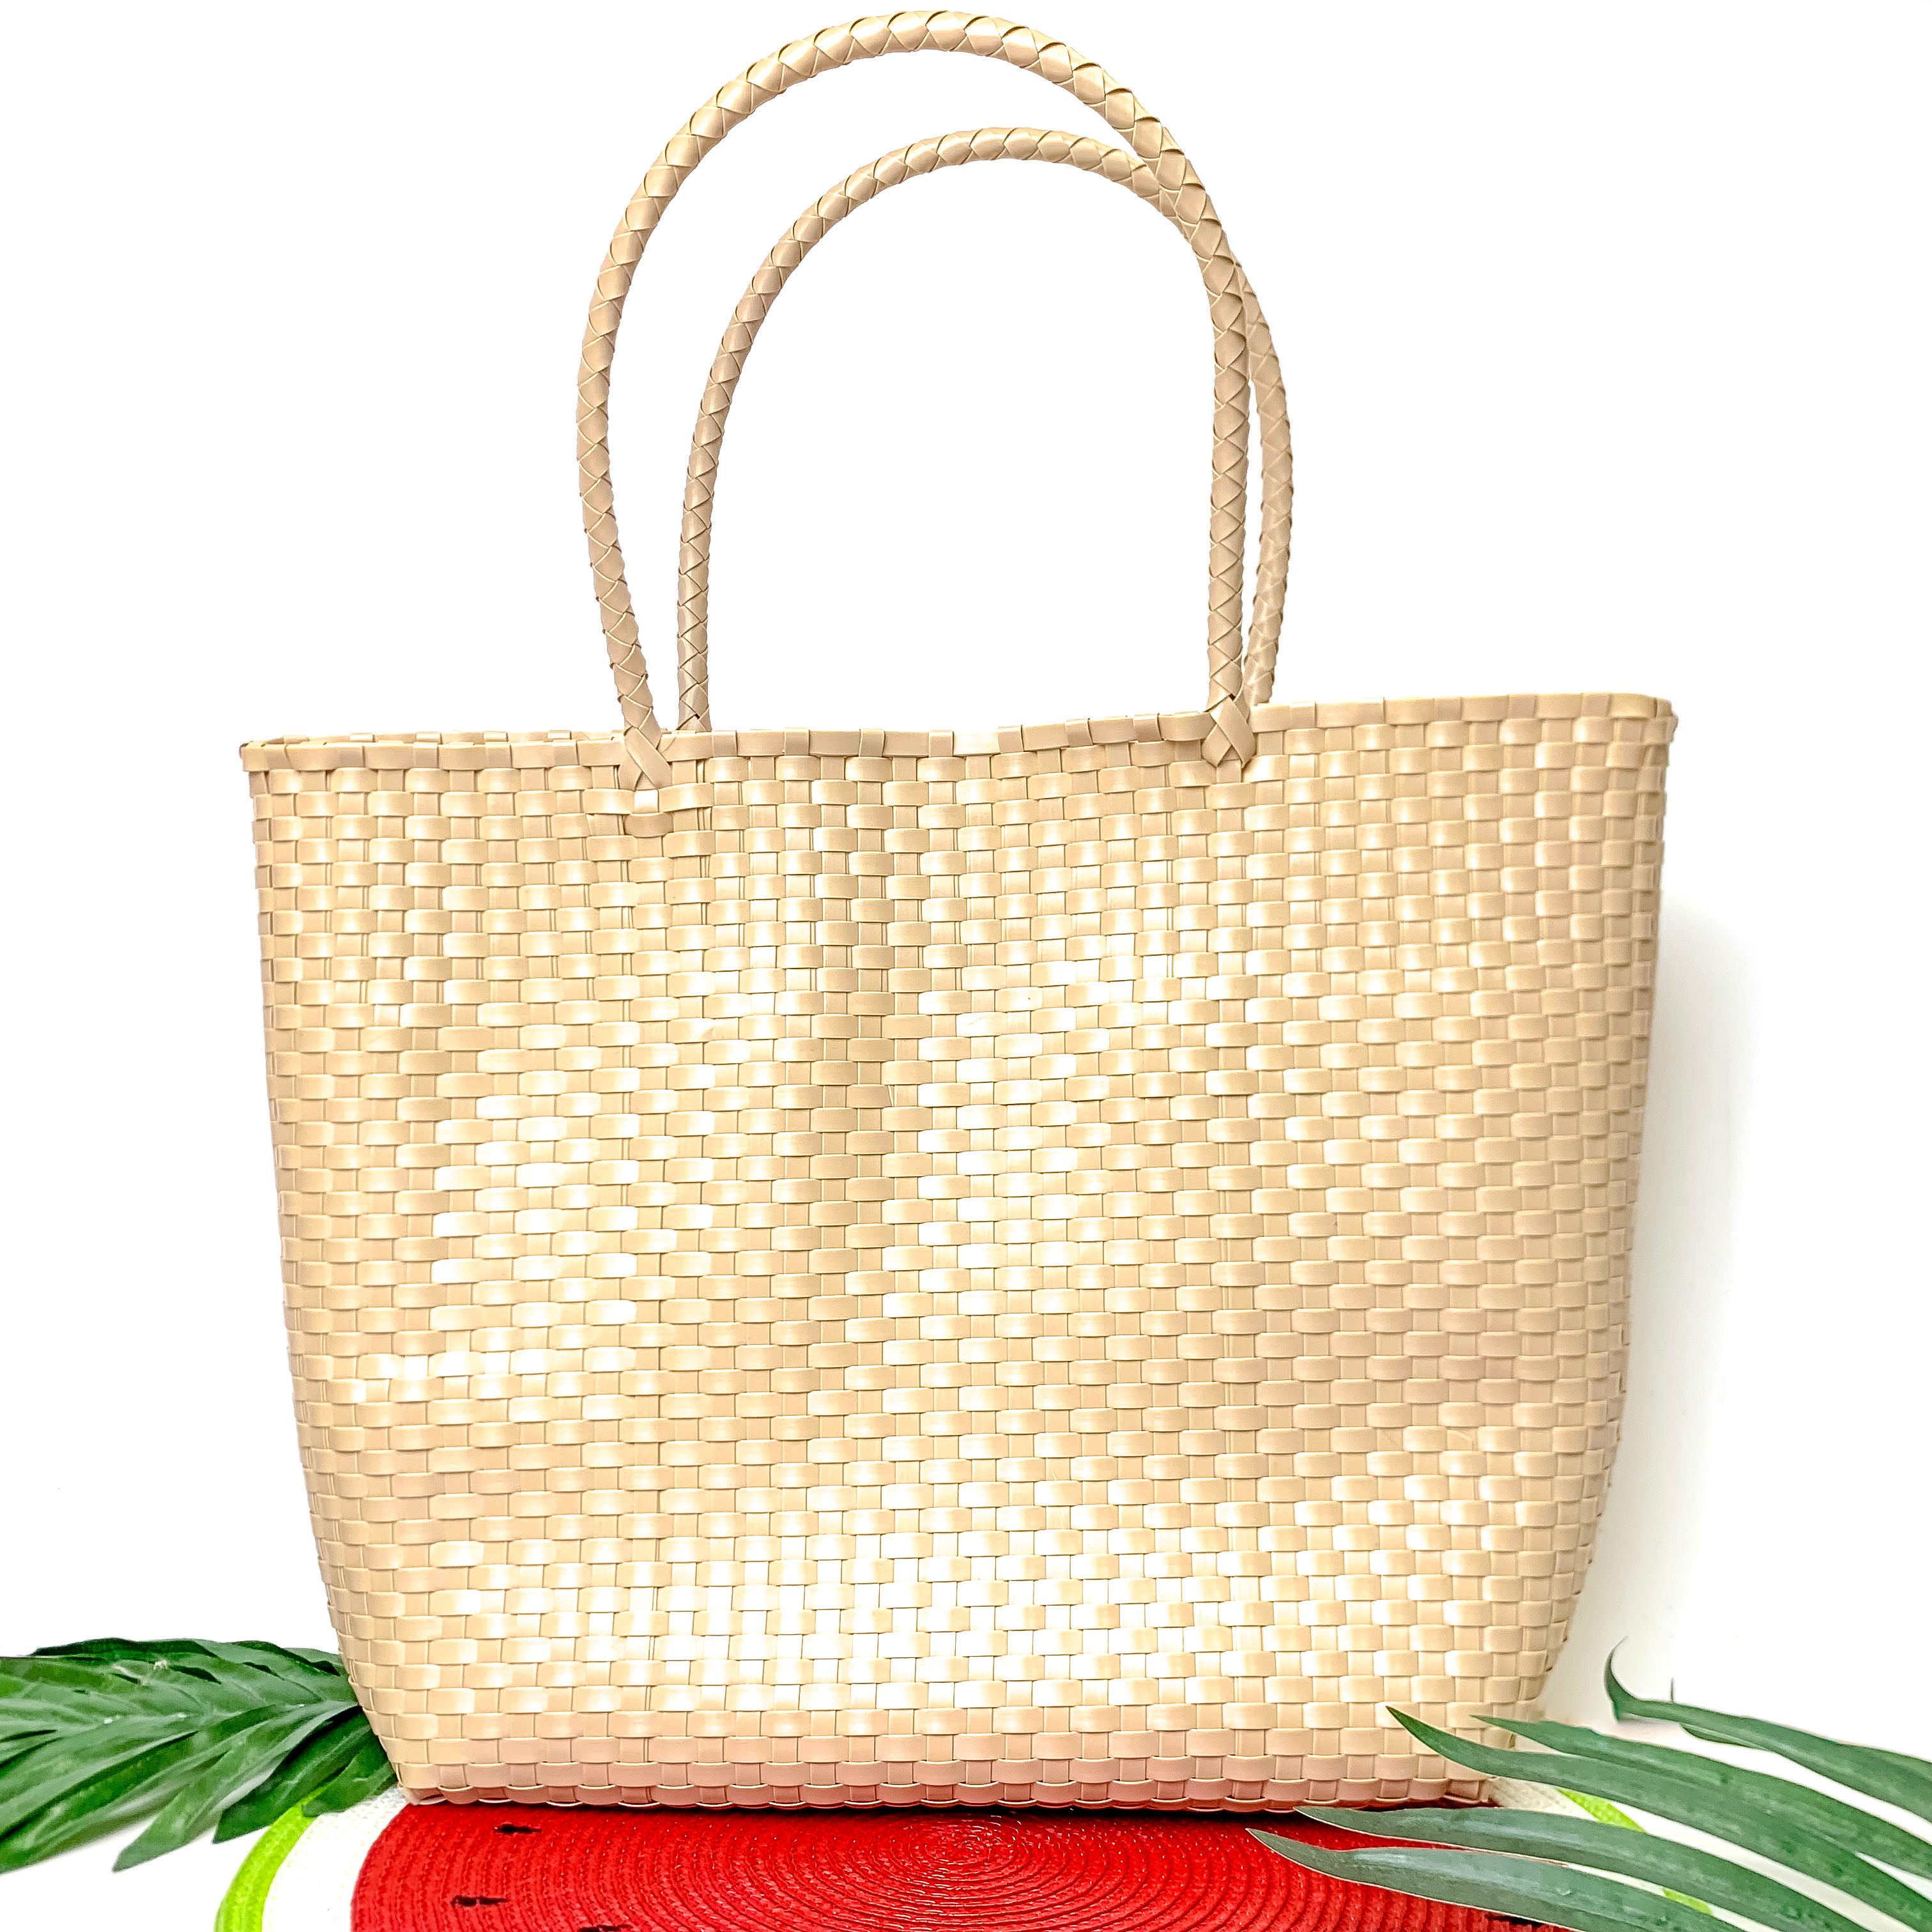 Coastal Couture Carryall Tote Bag in Beige